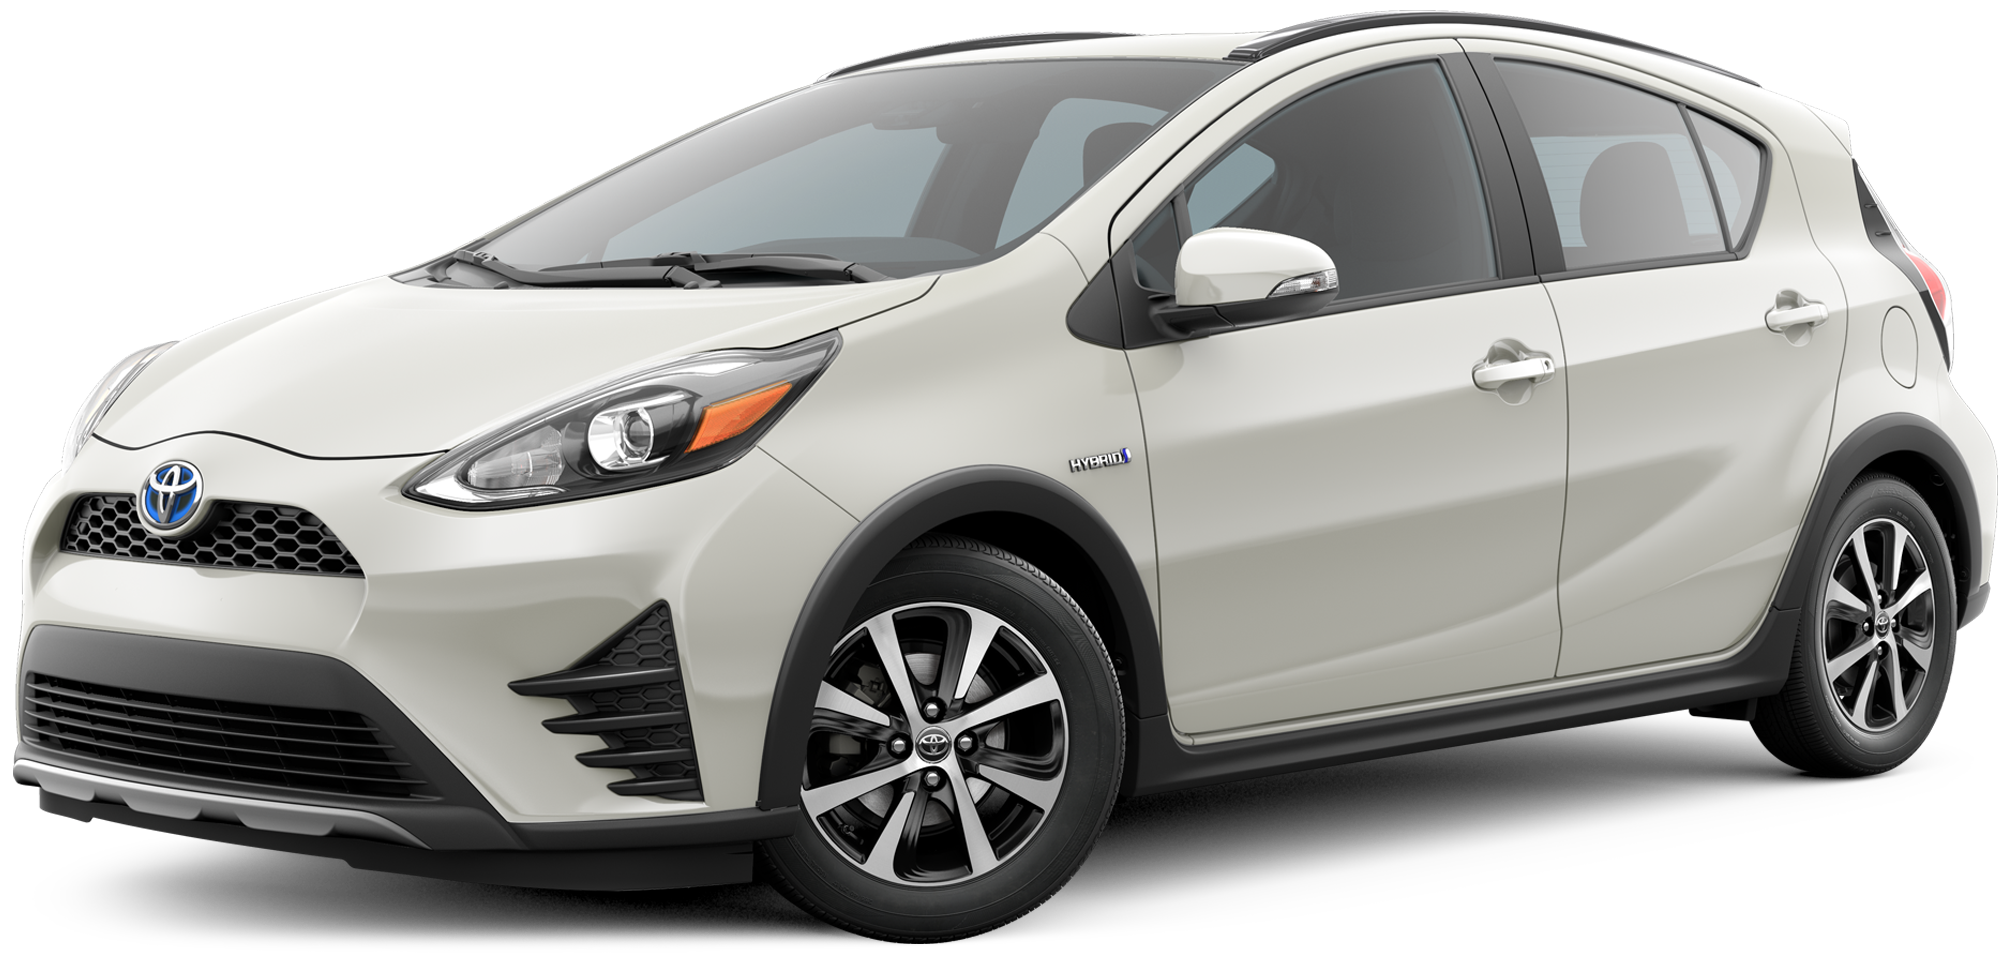 2019 Toyota Prius c Incentives, Specials & Offers in Oakland CA